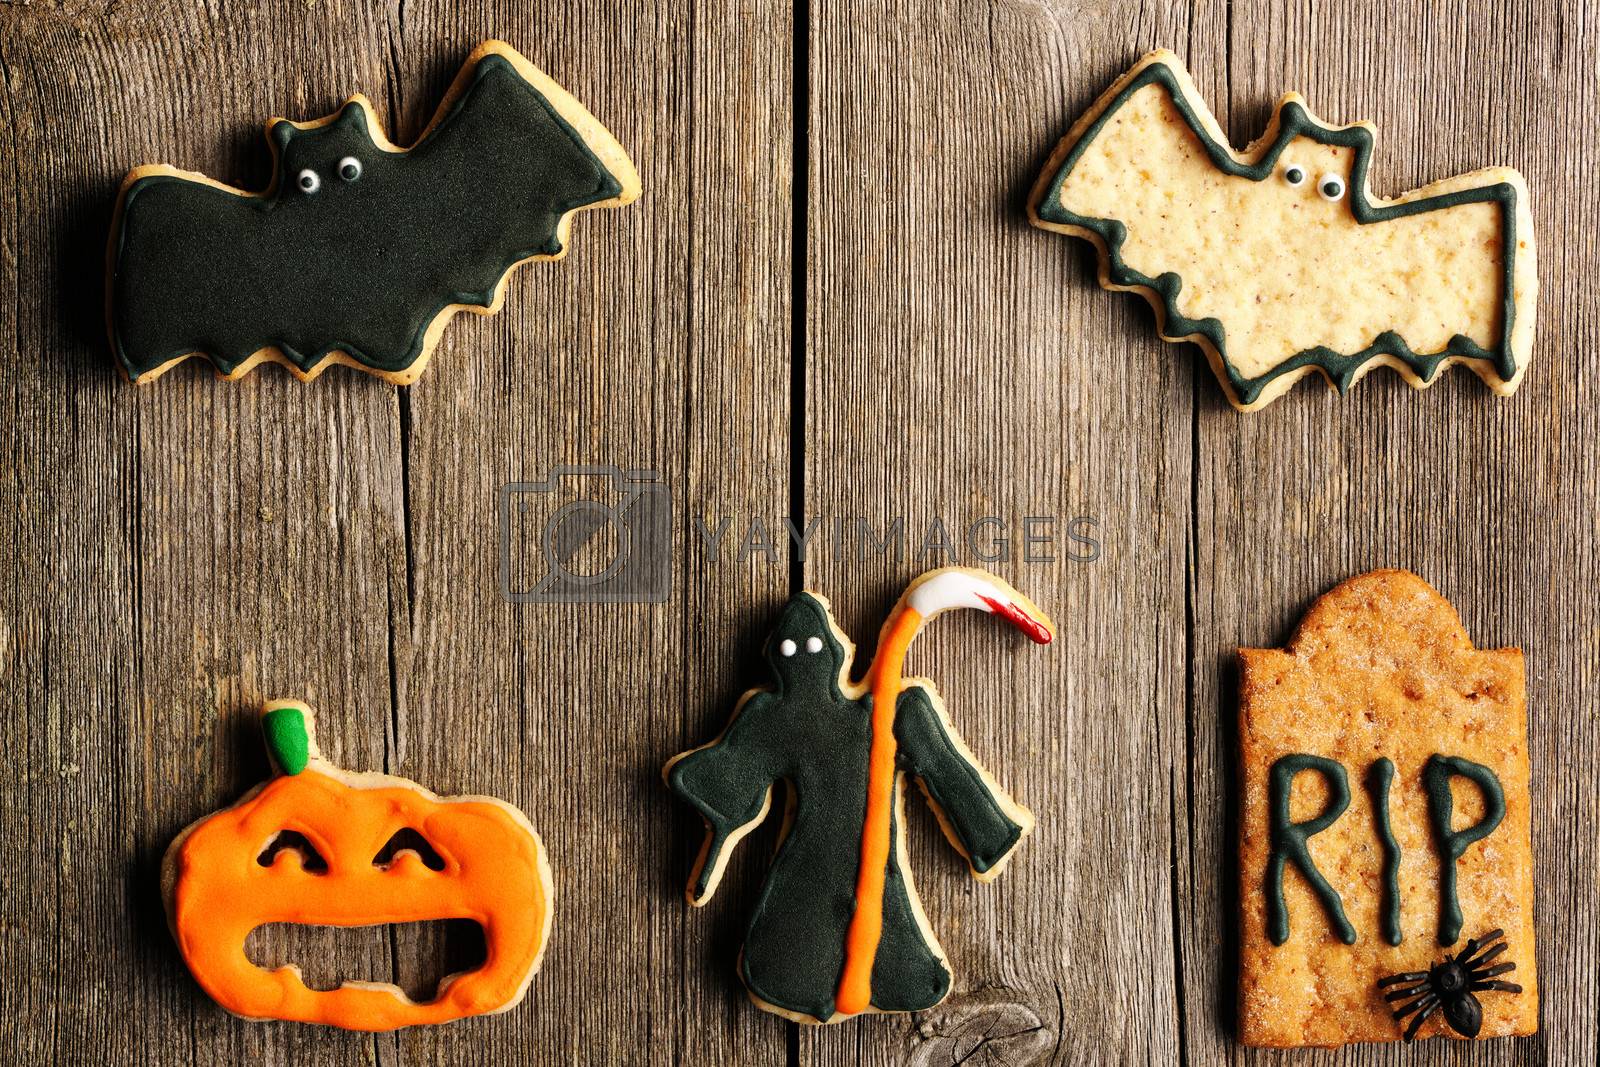 Royalty free image of Halloween homemade gingerbread cookies by haveseen